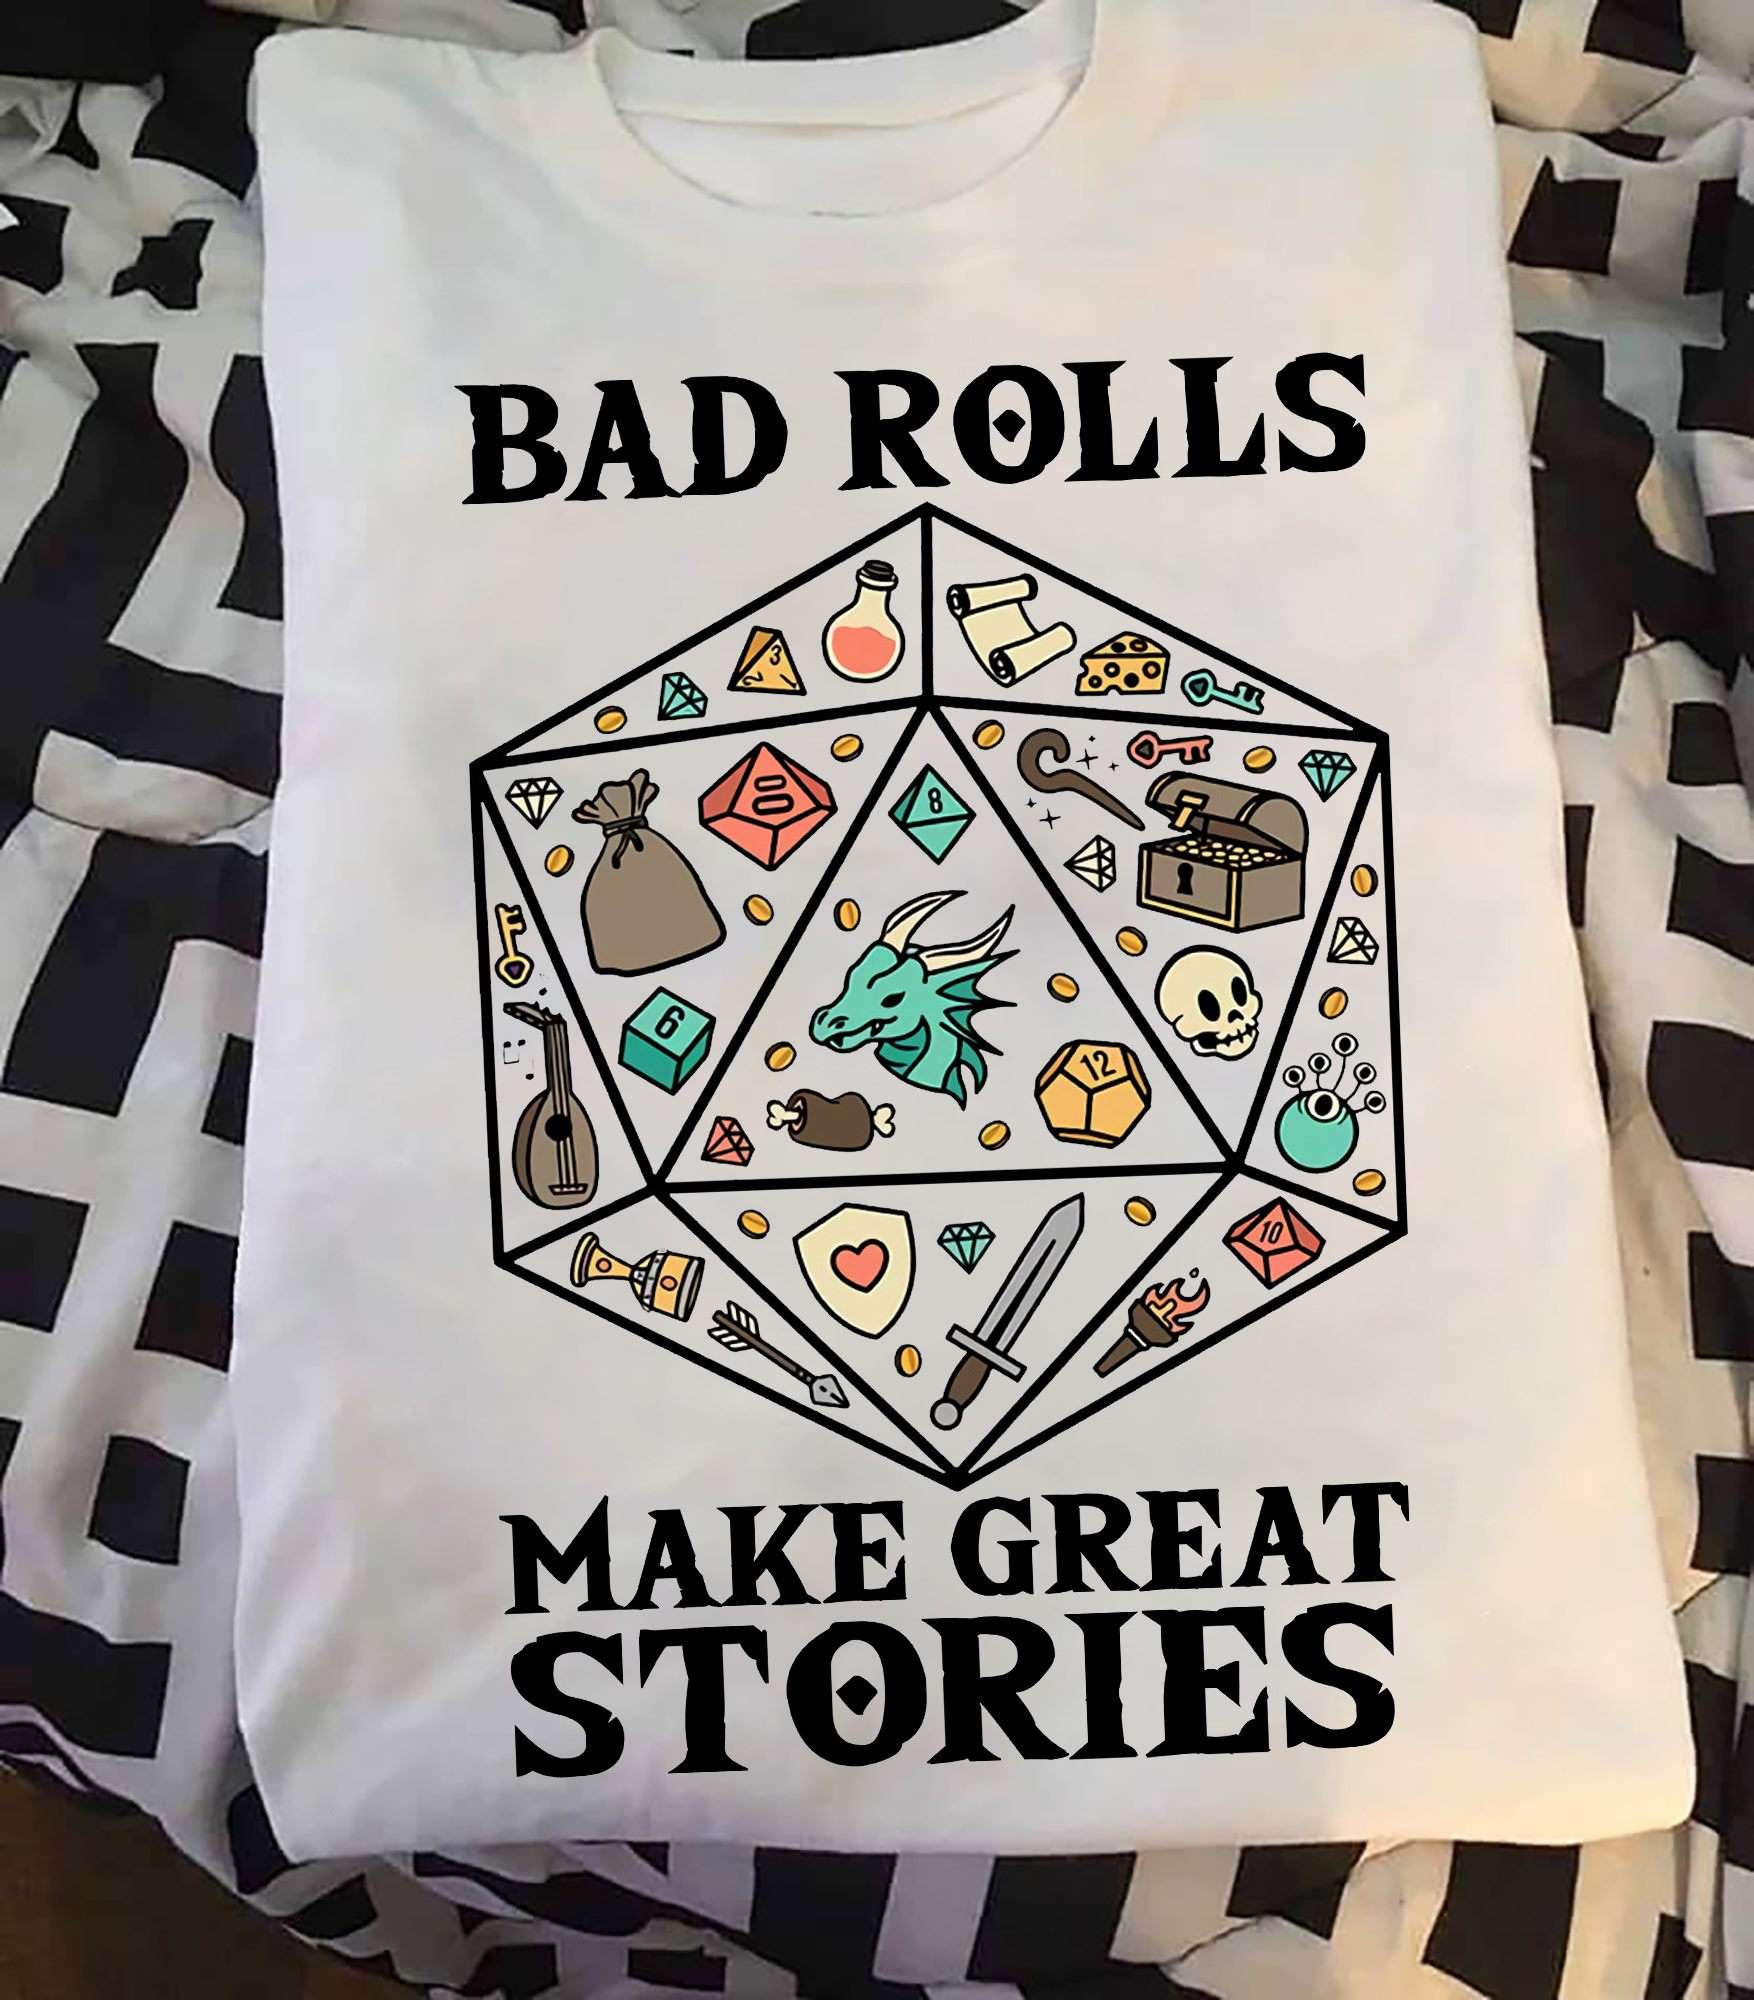 Bad rolls make great stories - Dungeons and Dragons, DnD game